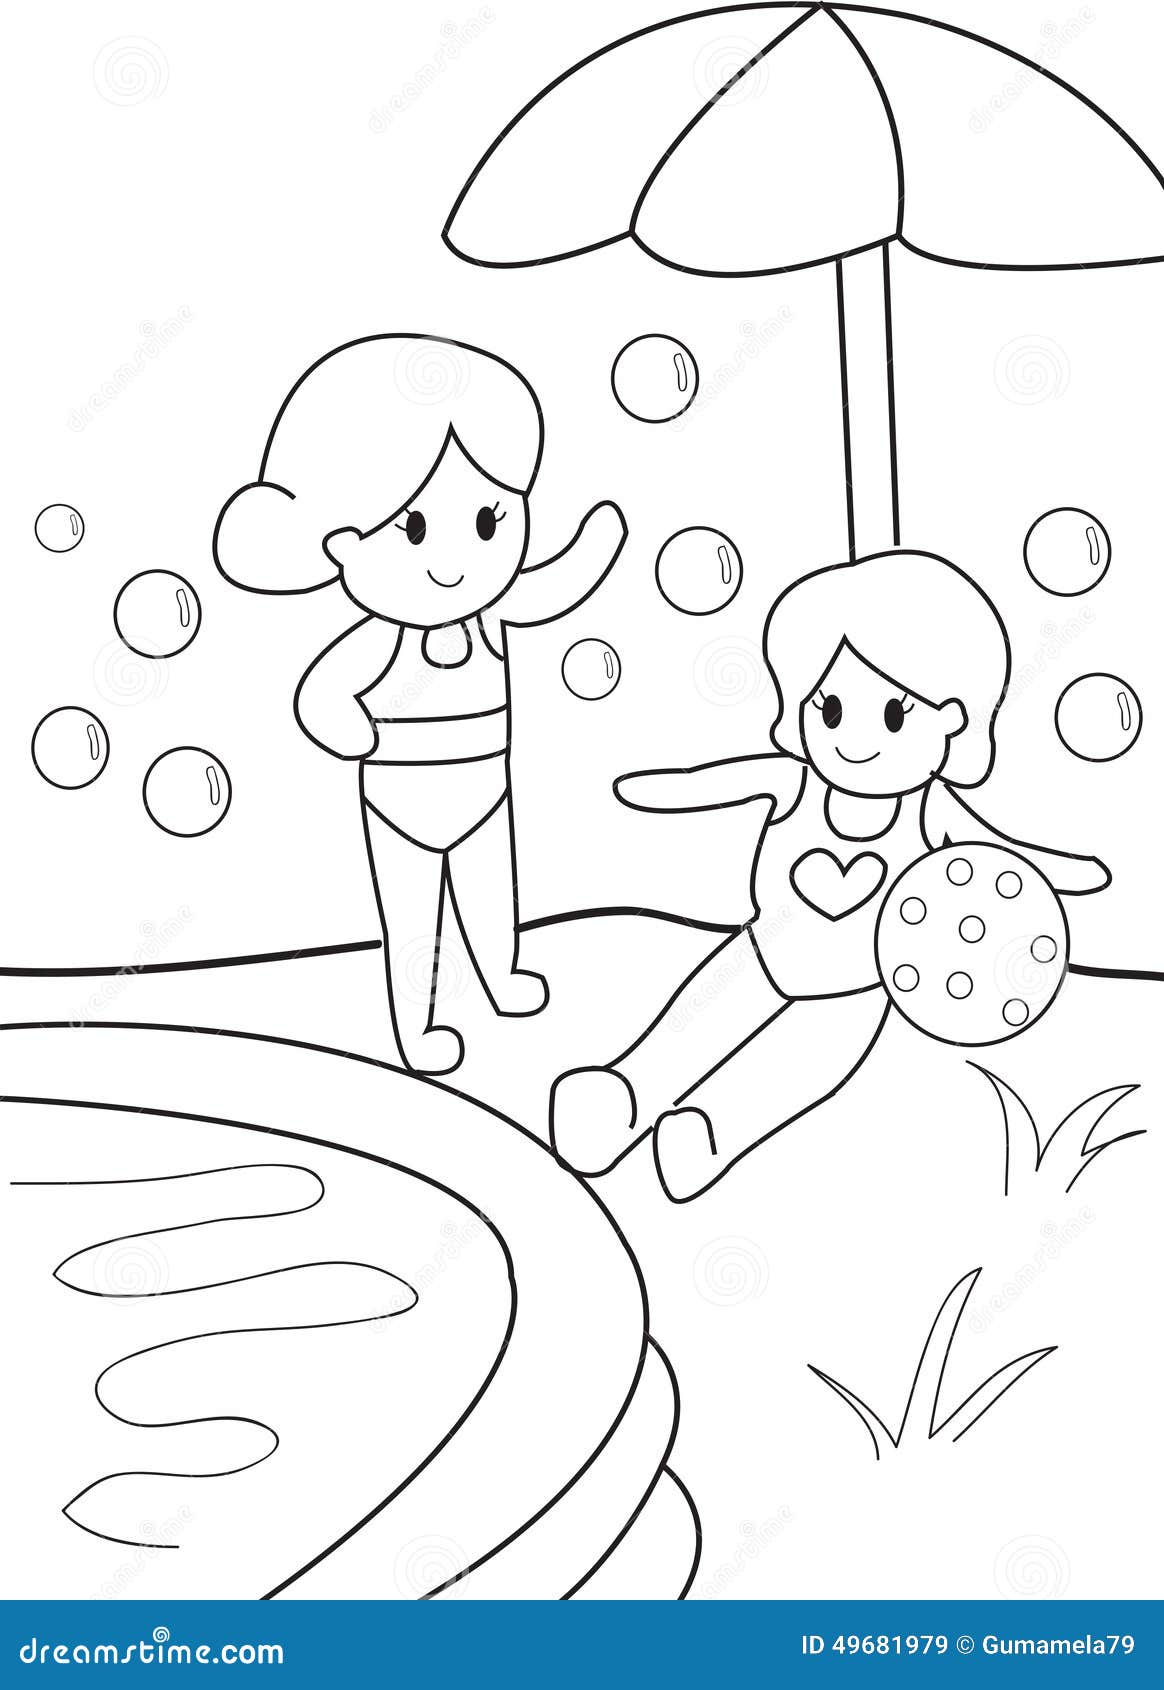 Girls By The Pool, Kid Coloring Page Stock Illustration